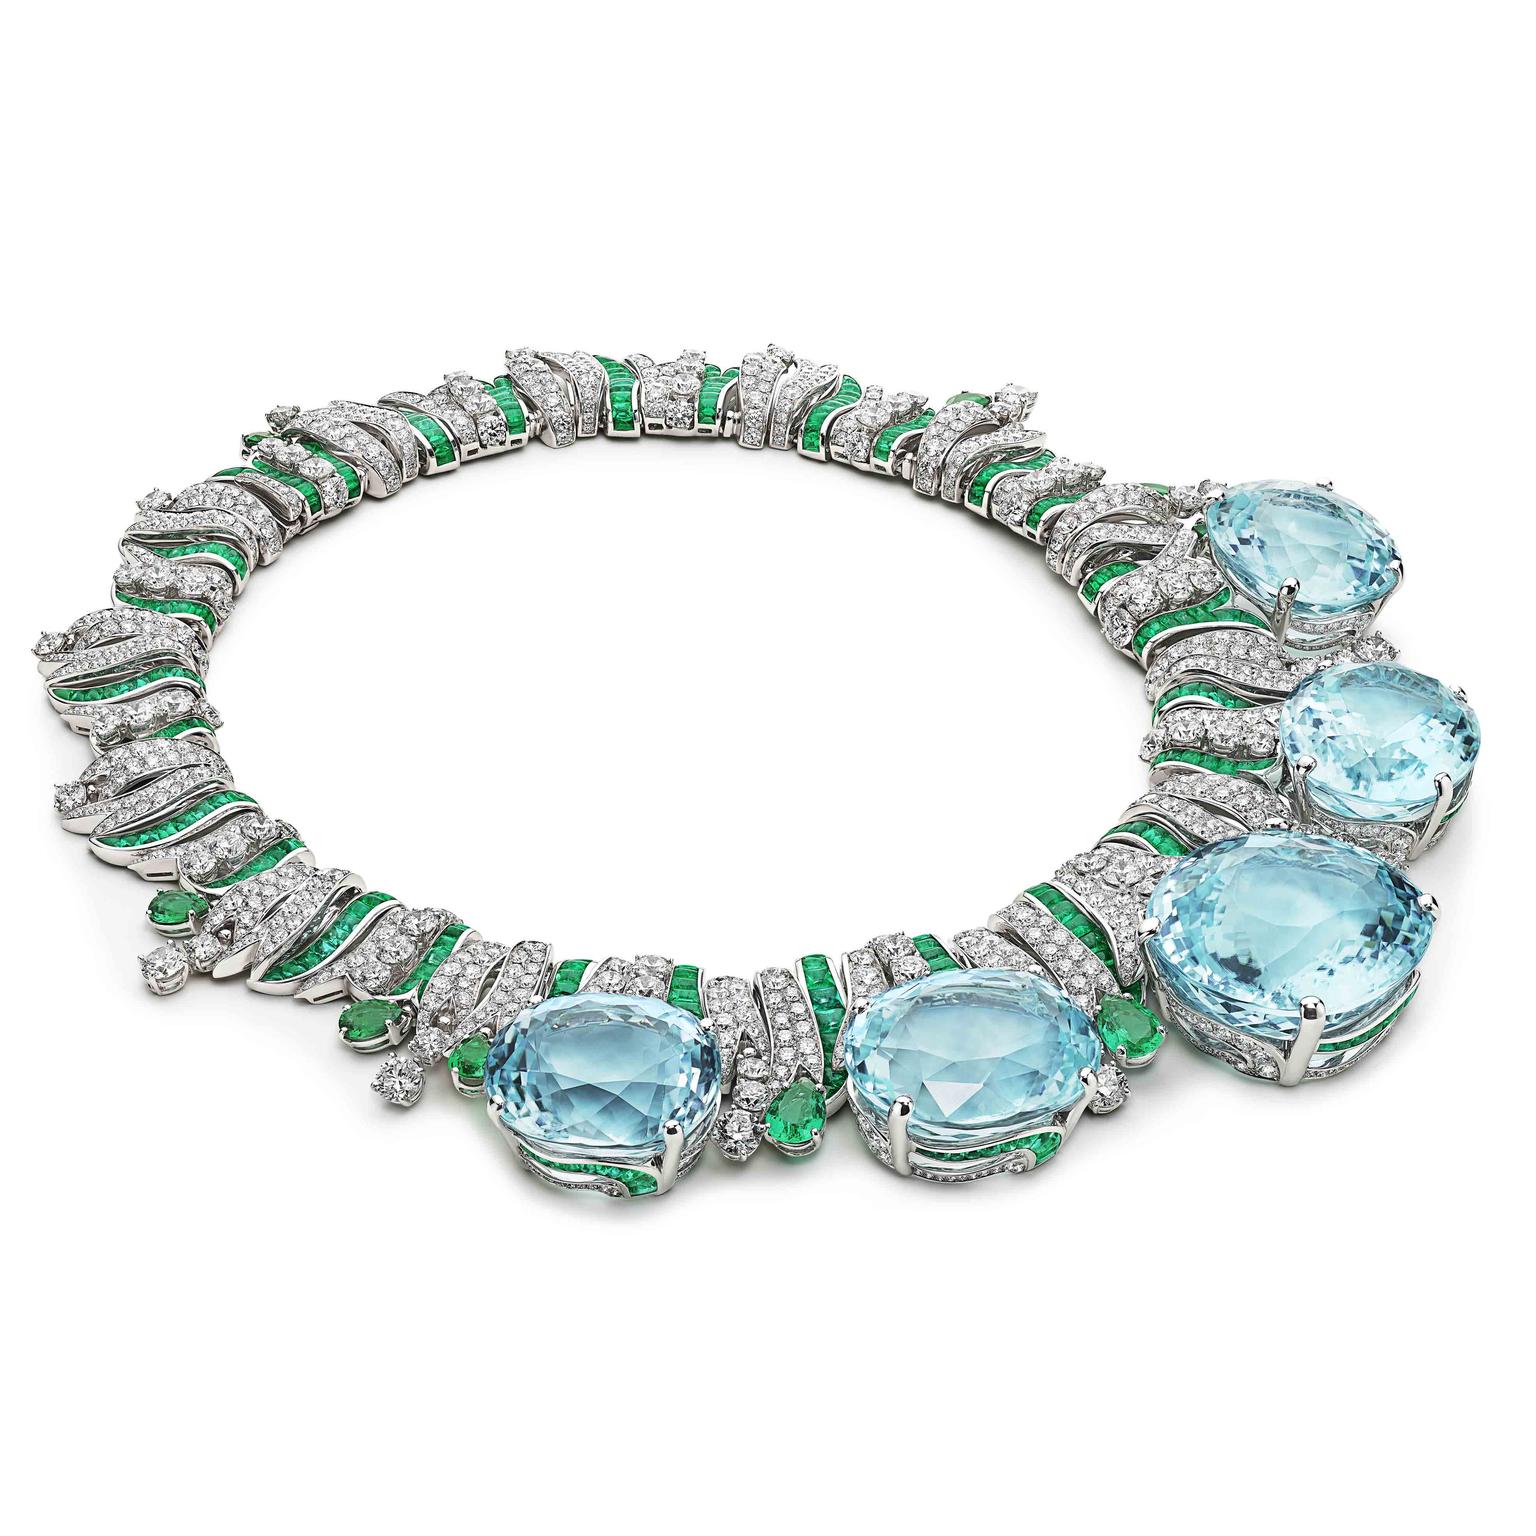 Bulgari Magnifica Collection Of High Jewelry Includes Fourth